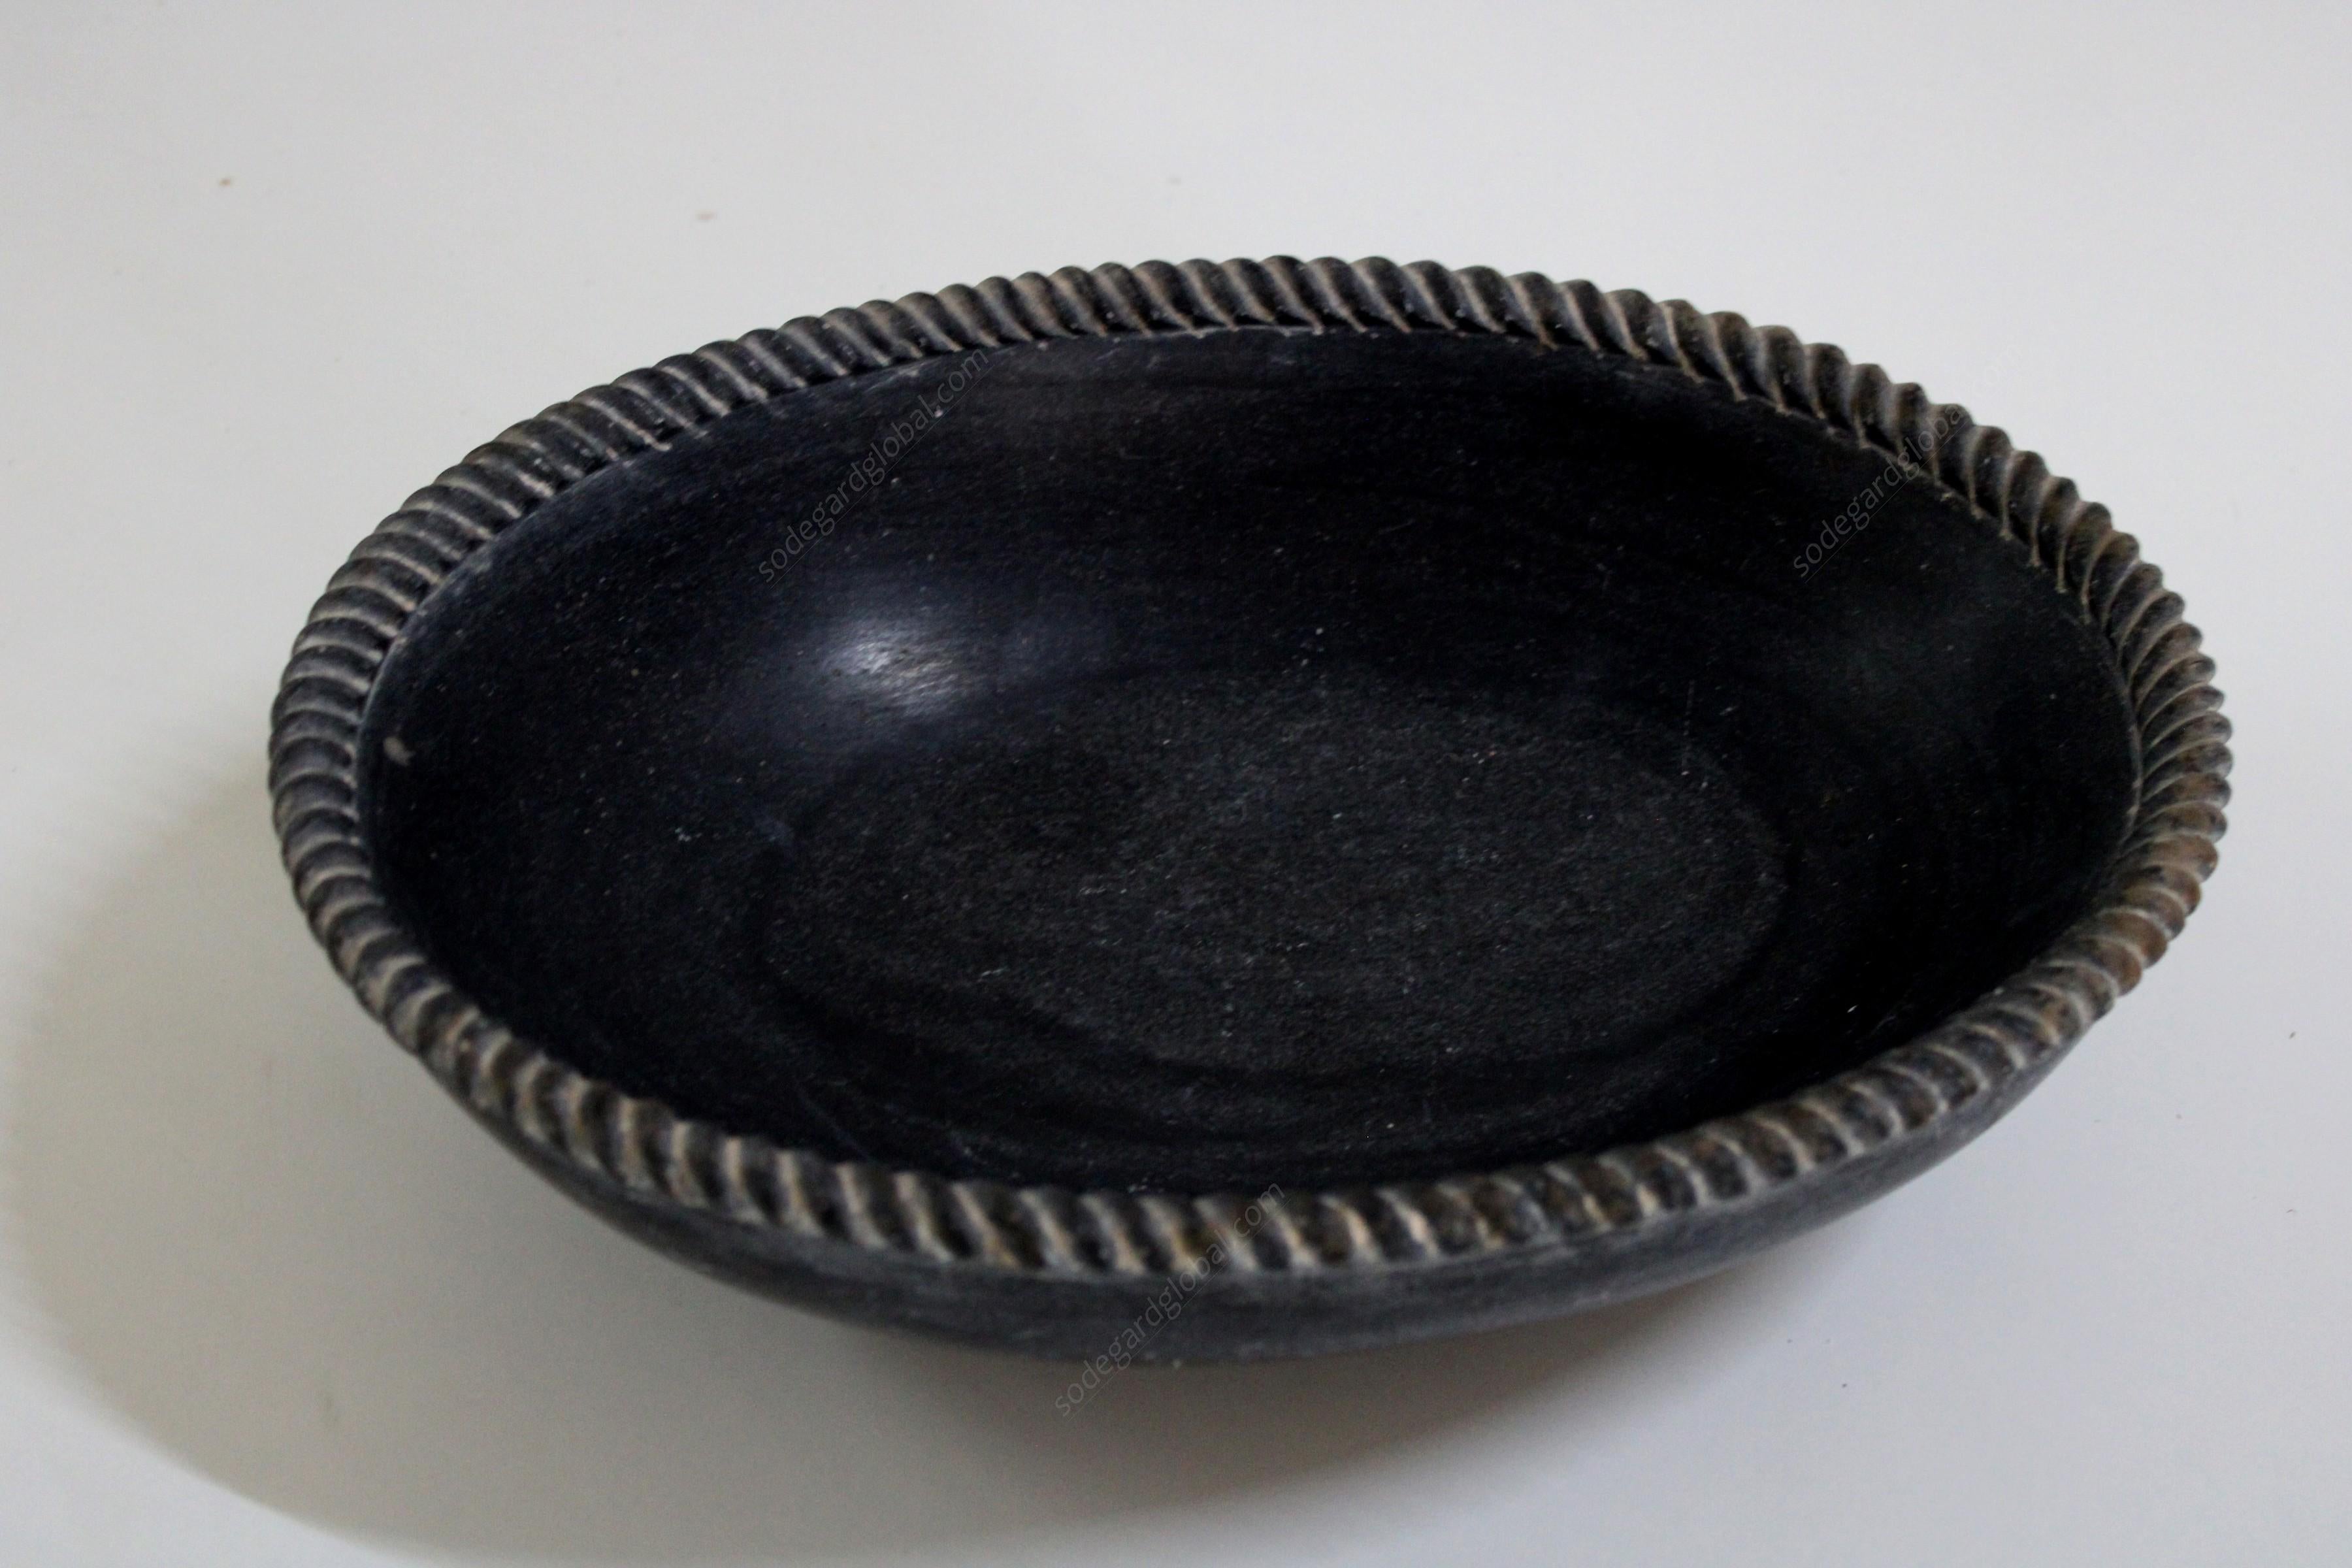 Sculpted out of a single block of marble with a delicately carved rope edge, perfect for a potpourri, a fruit bowl or just a key catch.


Oval Black Rope Bowl
Size- 14” x 11” x 4” H
Materials - Black Marble, Hand-Carved


Buyer Cancellation-
The